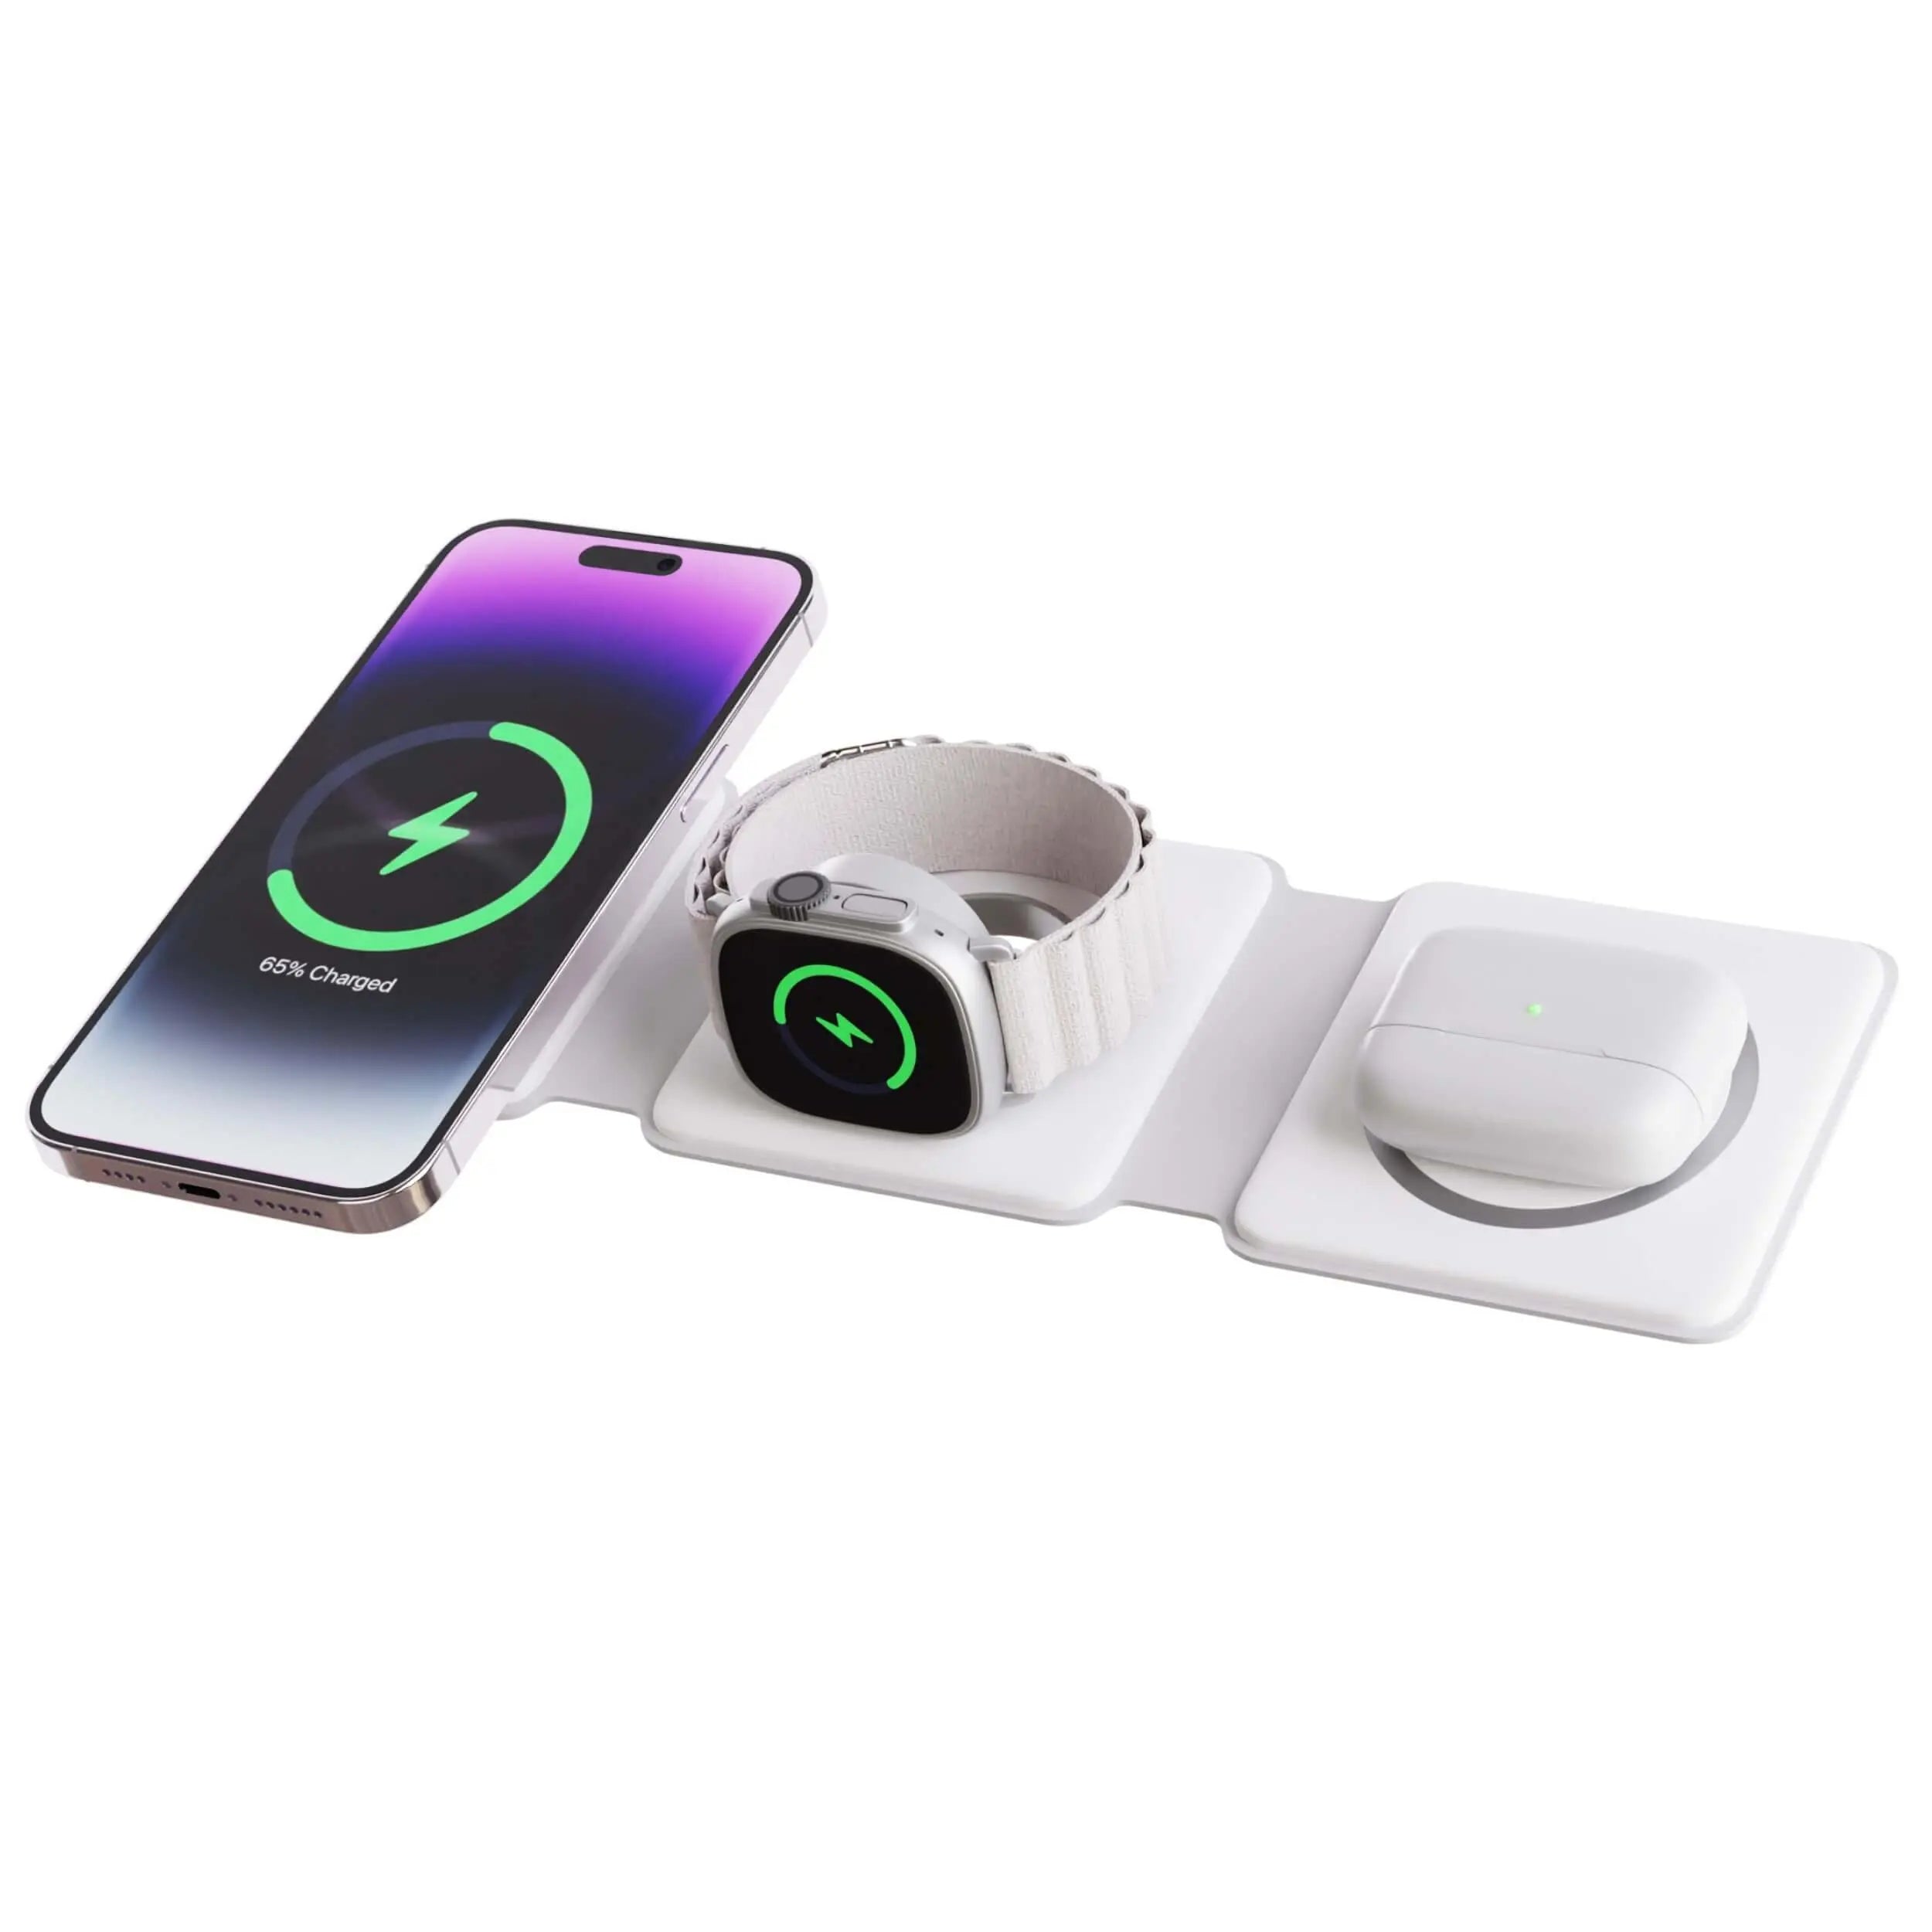 3 in 1 Portable Wireless Travel Charger for Apple iPhone, Apple